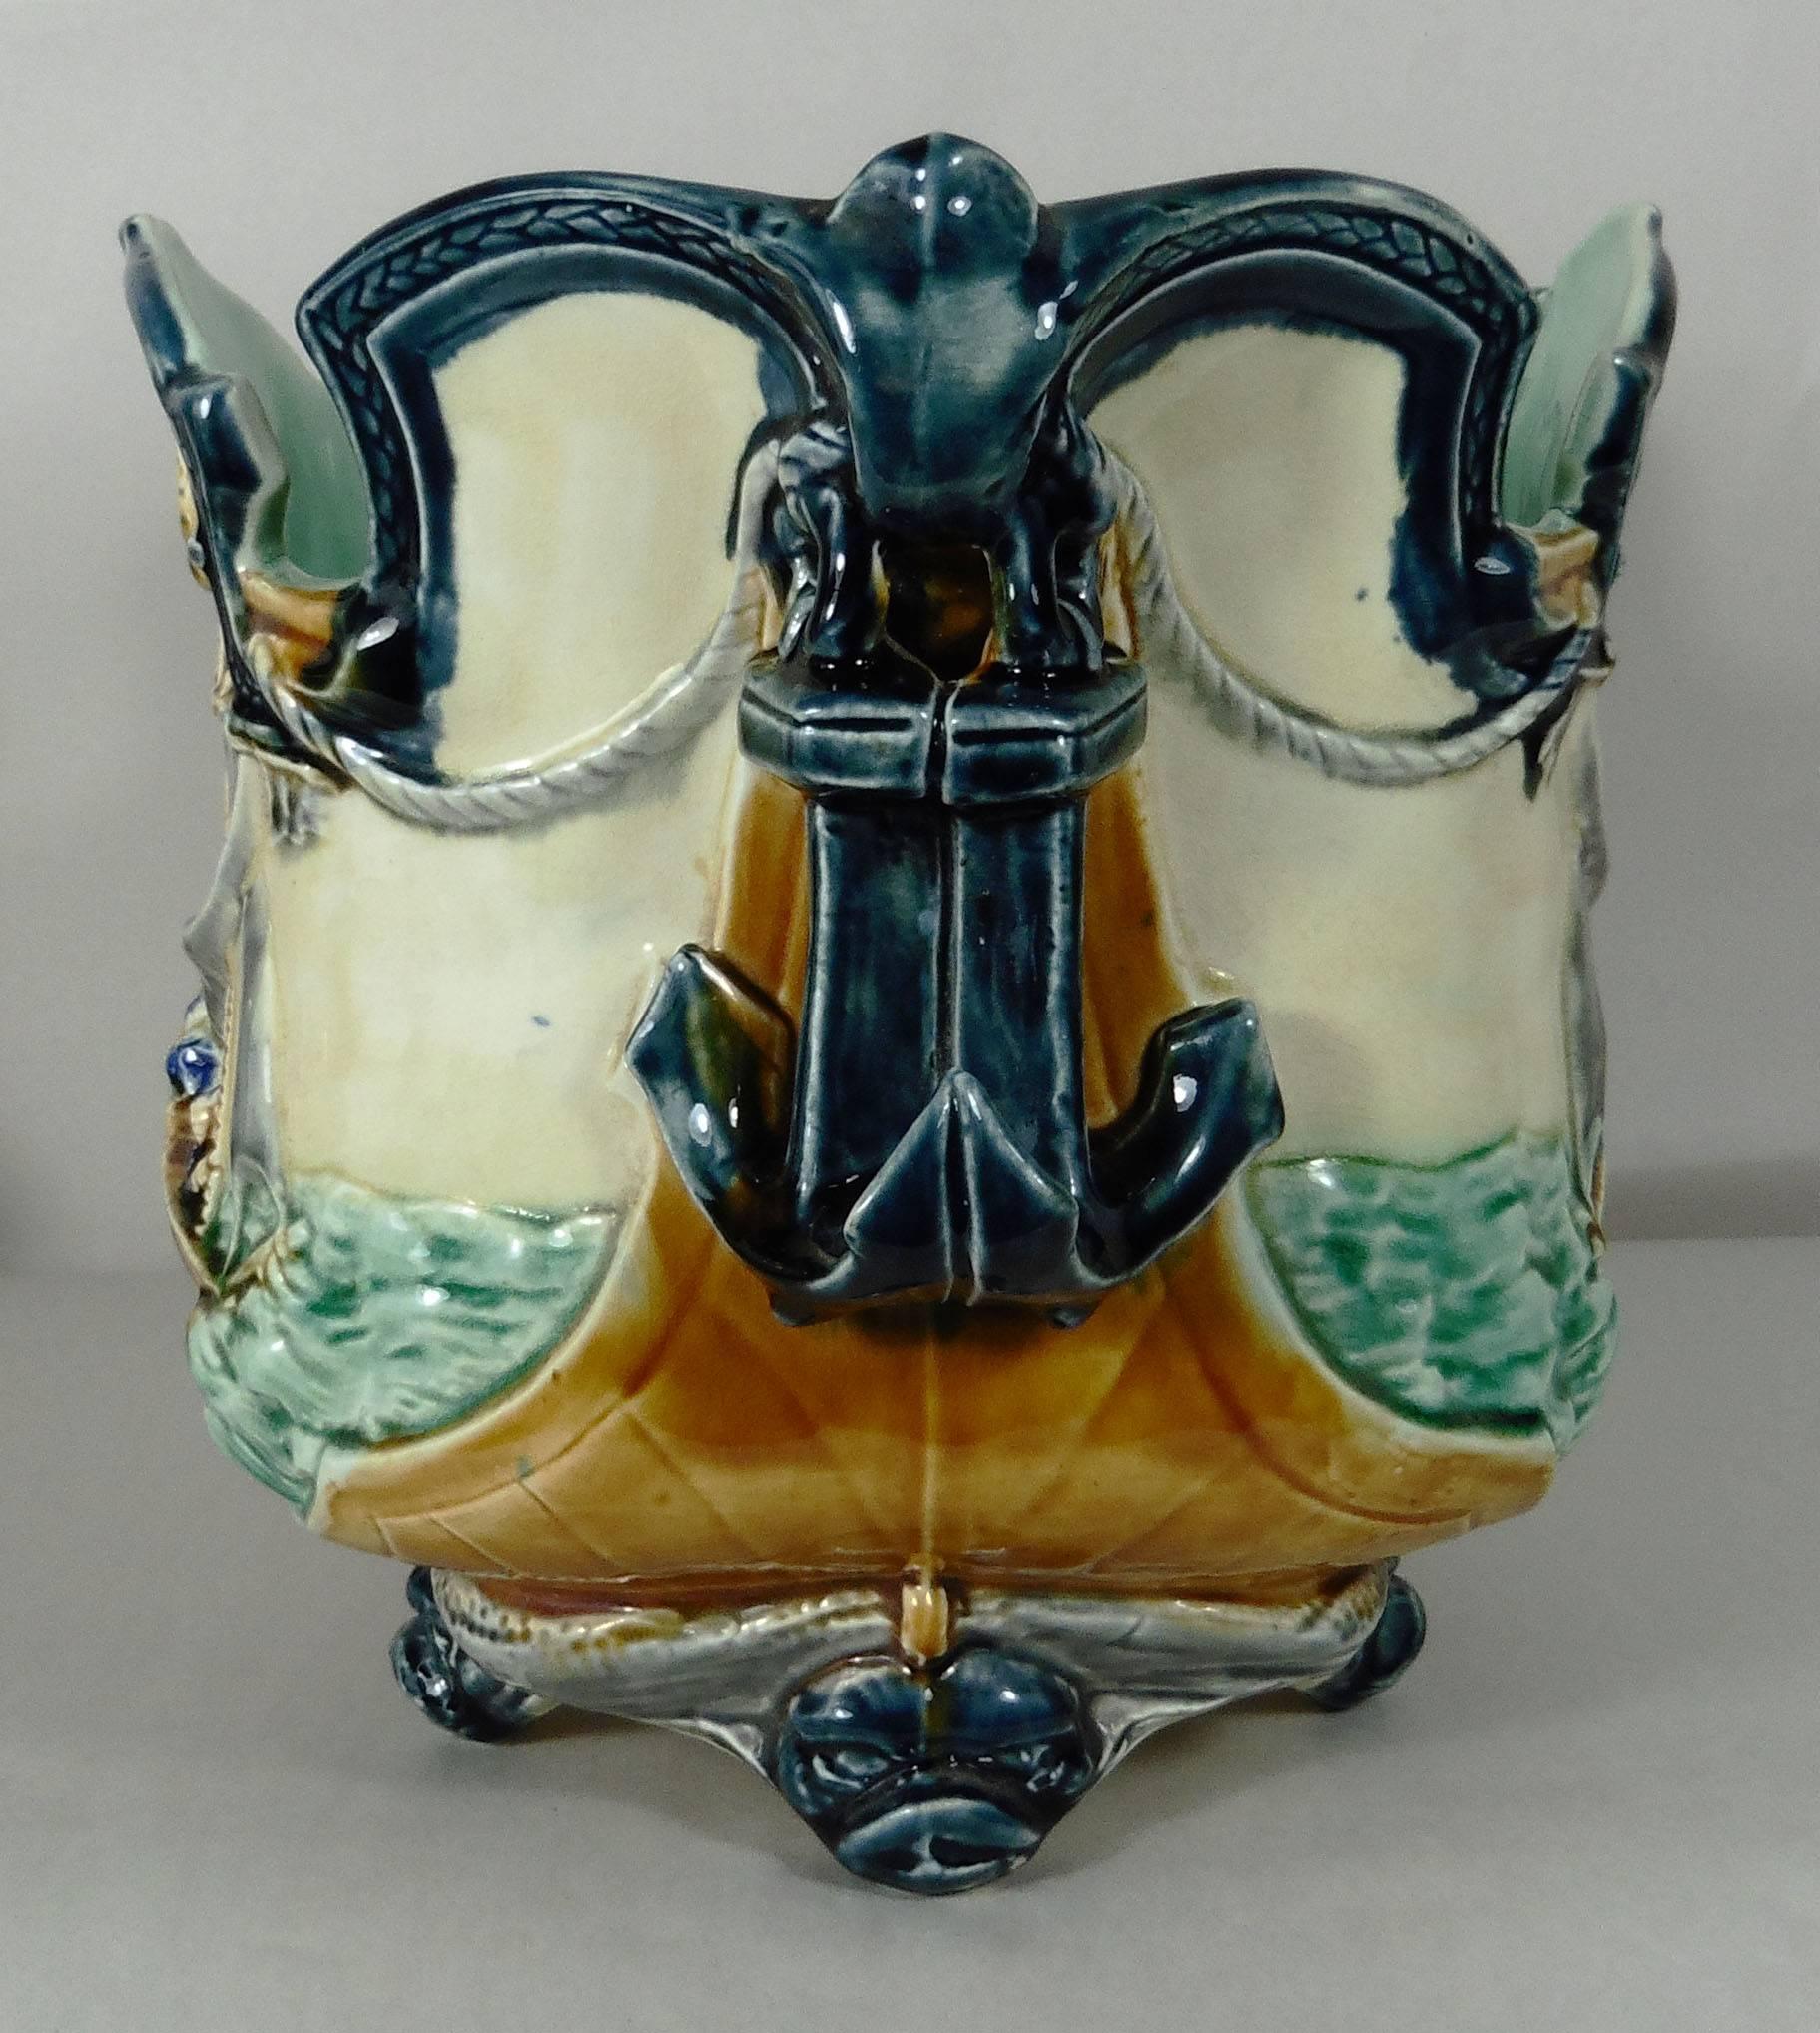 19th century, majolica nautical jardinière the two handles are anchors signed Onnaing, the feets are dolphins and the front are decorated with boats on the sea.